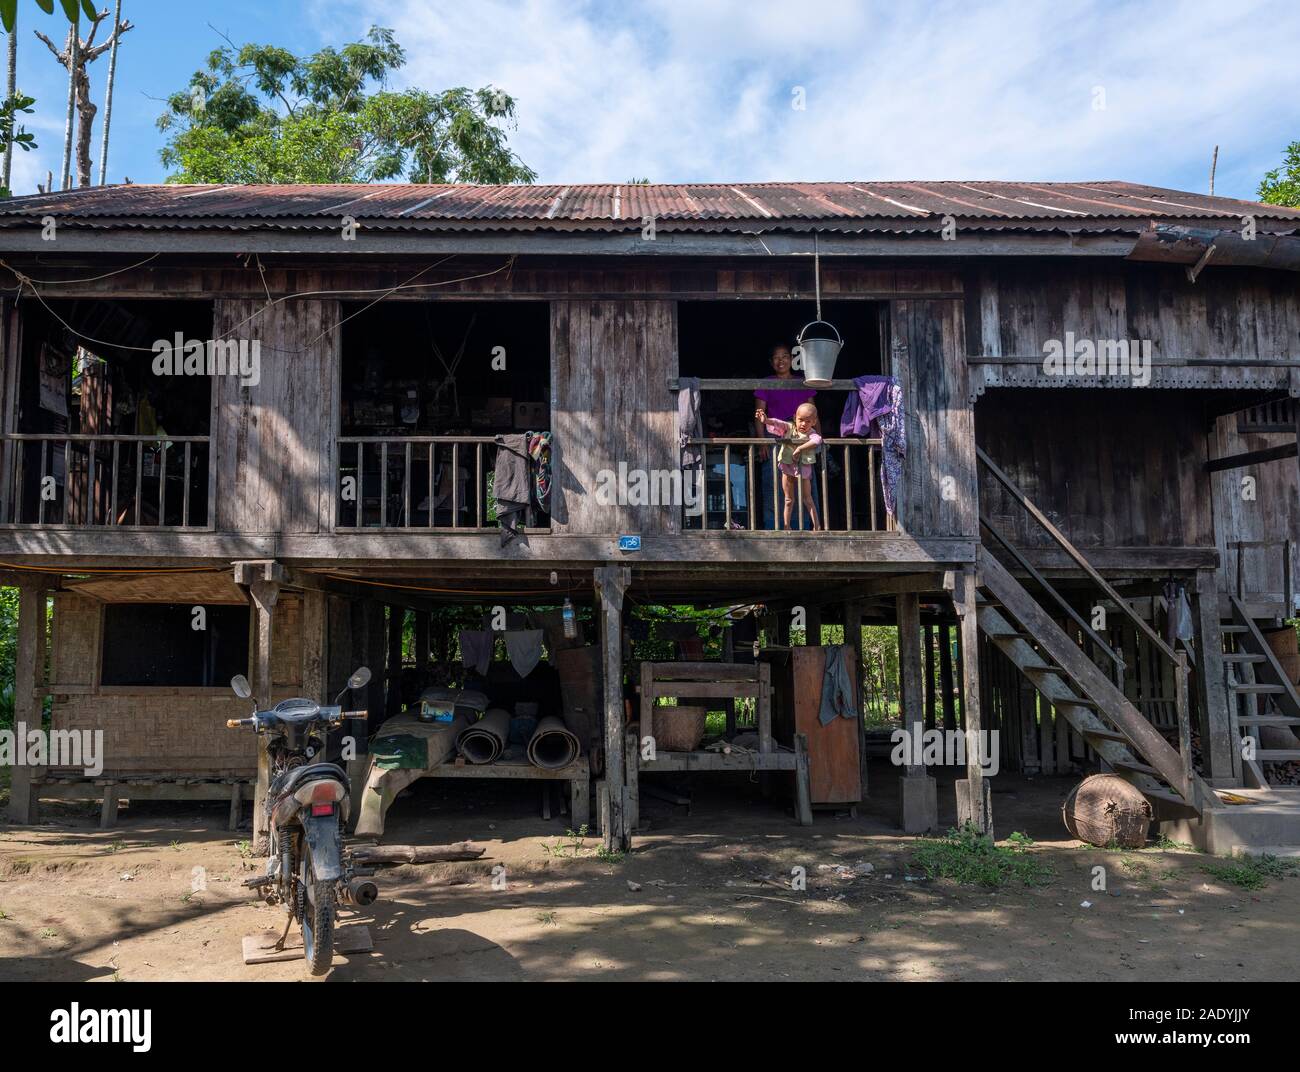 A traditional Burmese village house with tin roof, wooden construction, raised pilings and open air outlook in northwestern Myanmar (Burma) Stock Photo